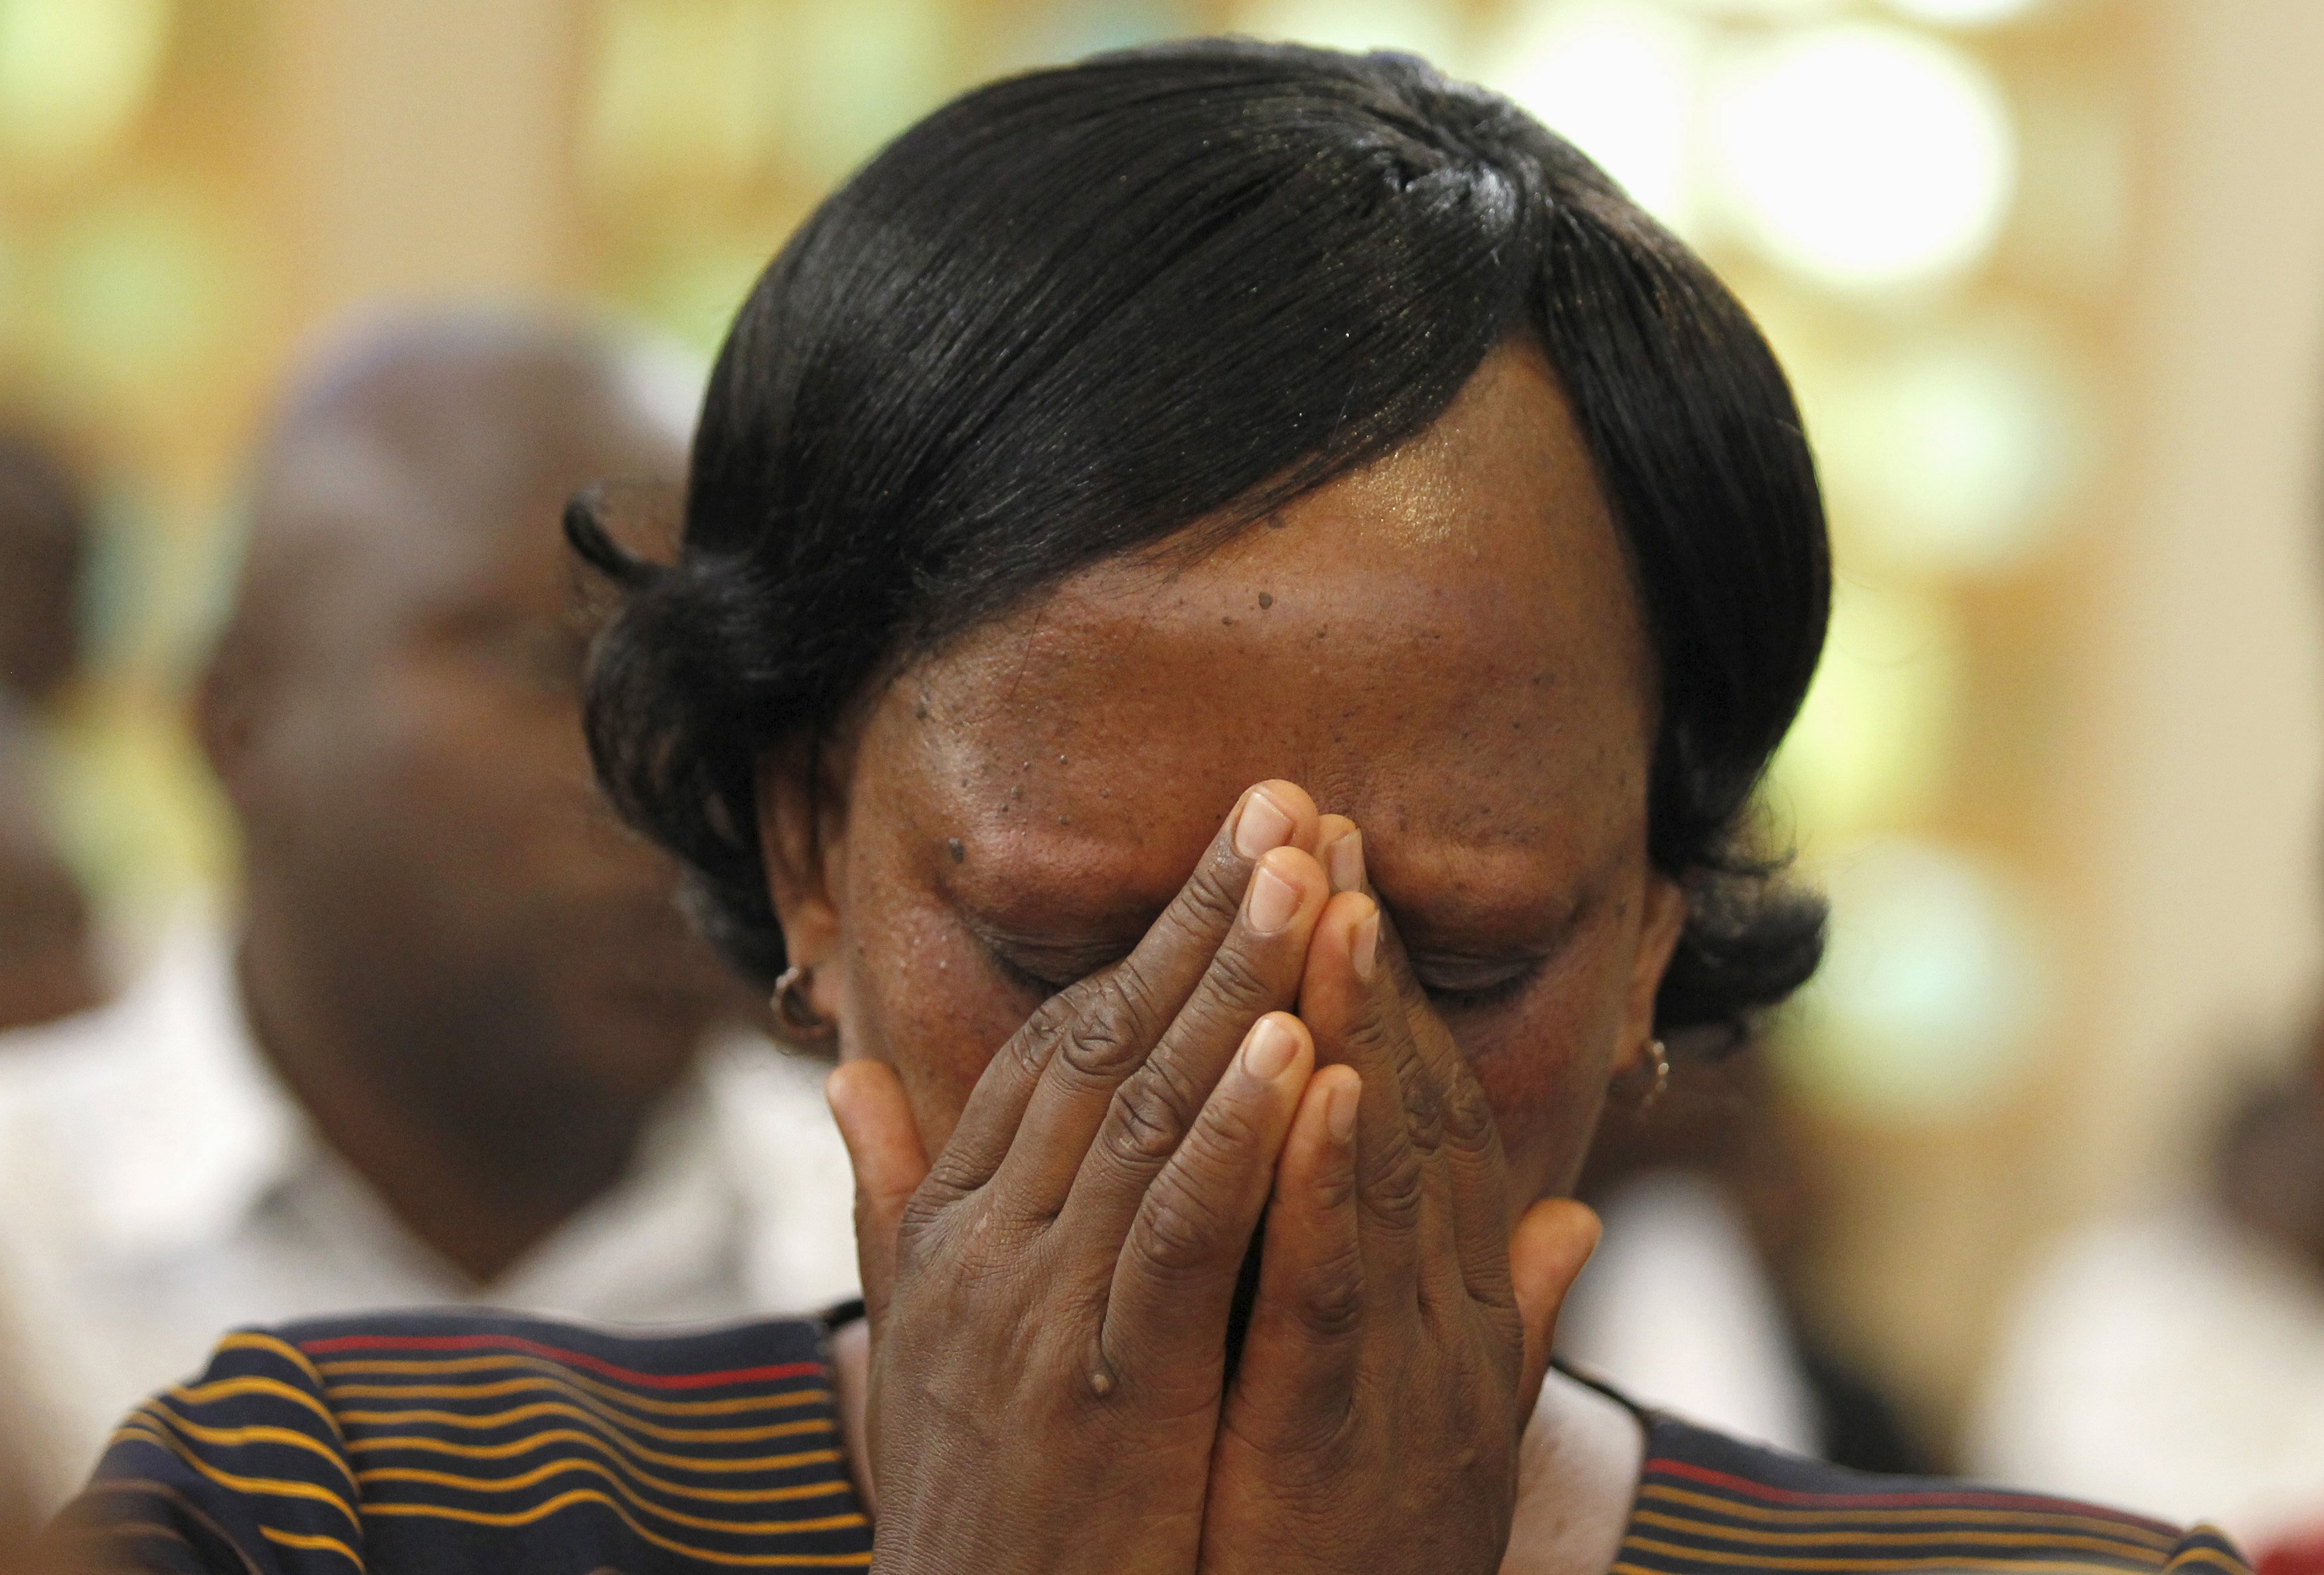 A person prays during a special Easter mass at the Holy Family Basilica Catholic Church for the victims of the Garissa University attack in Kenya's capital Nairobi.